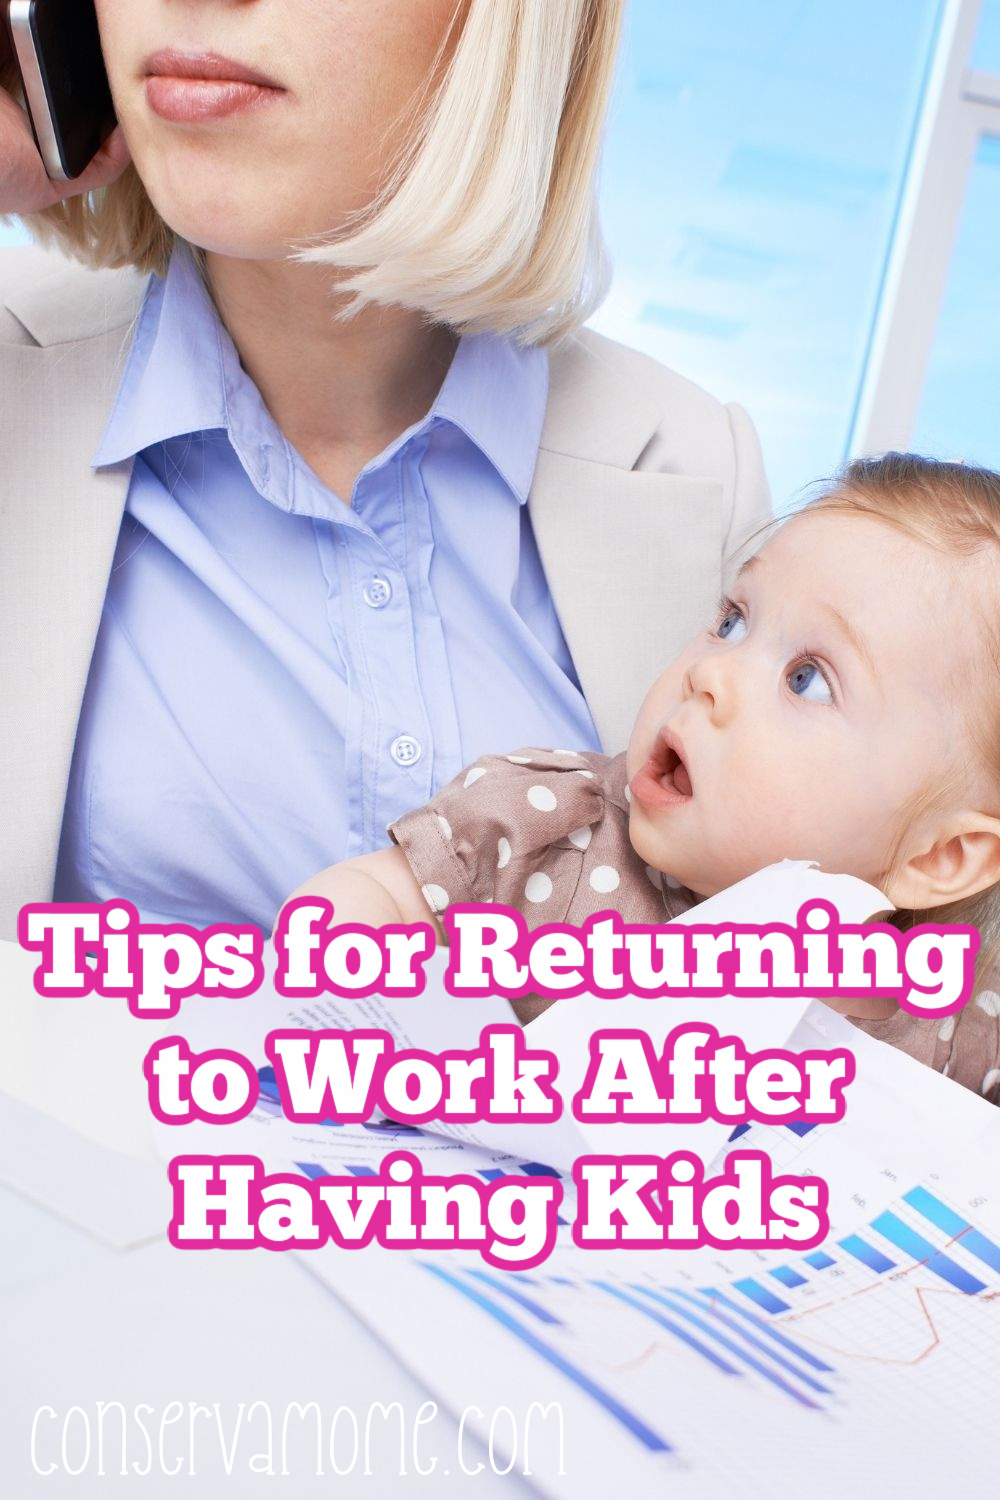 Tips for Returning to Work After Having Kids